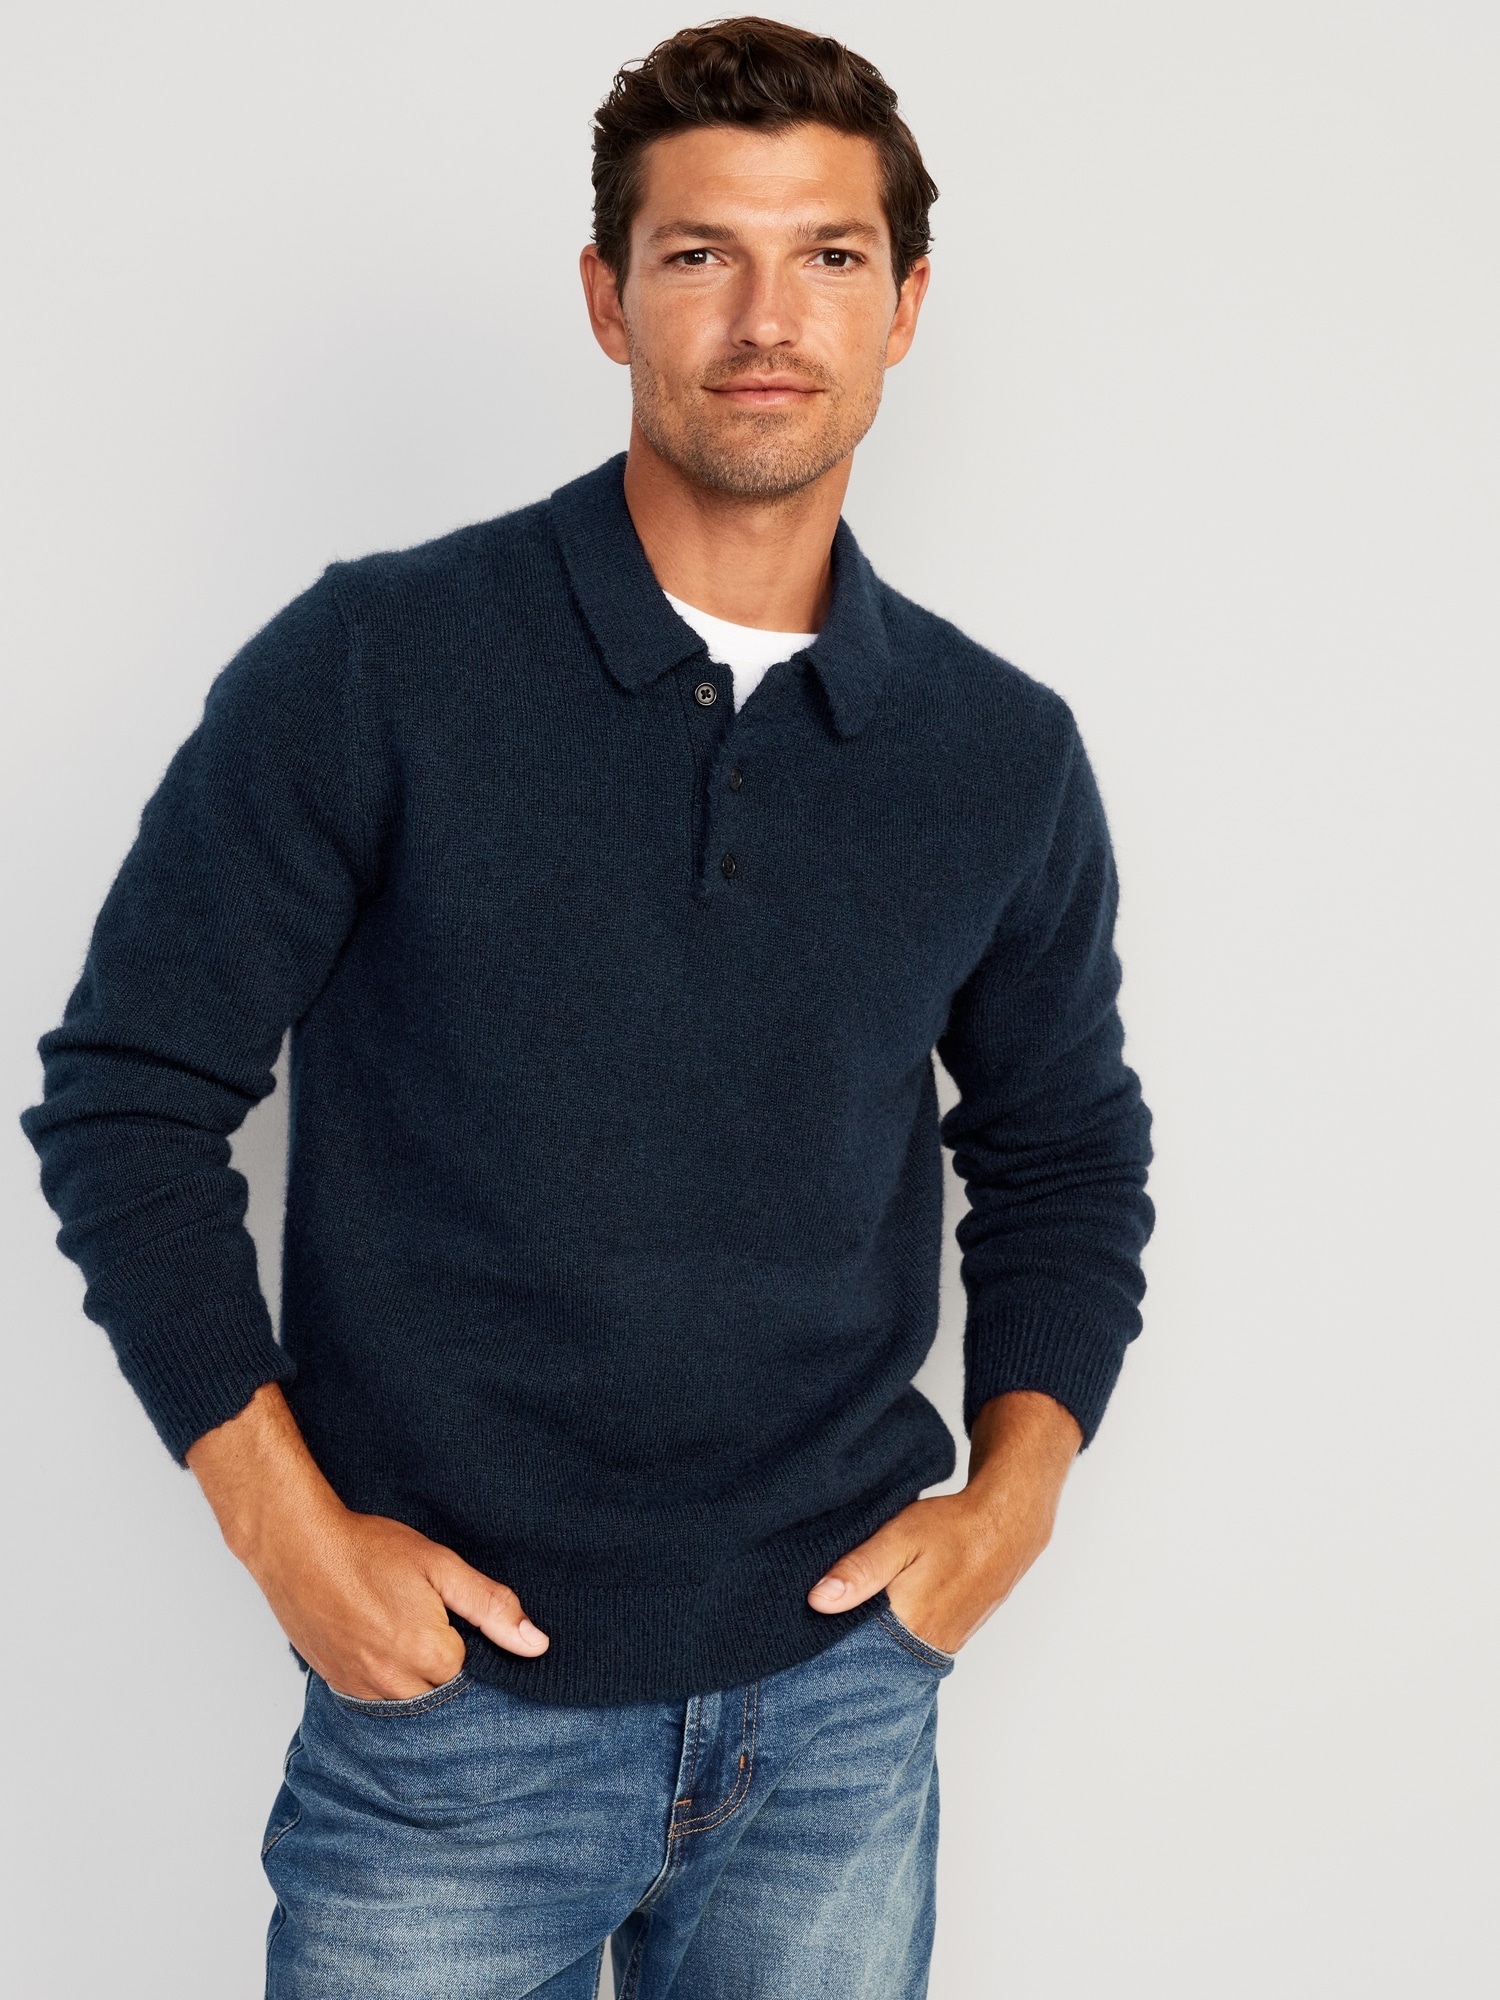 Polo Sweater | Old Navy